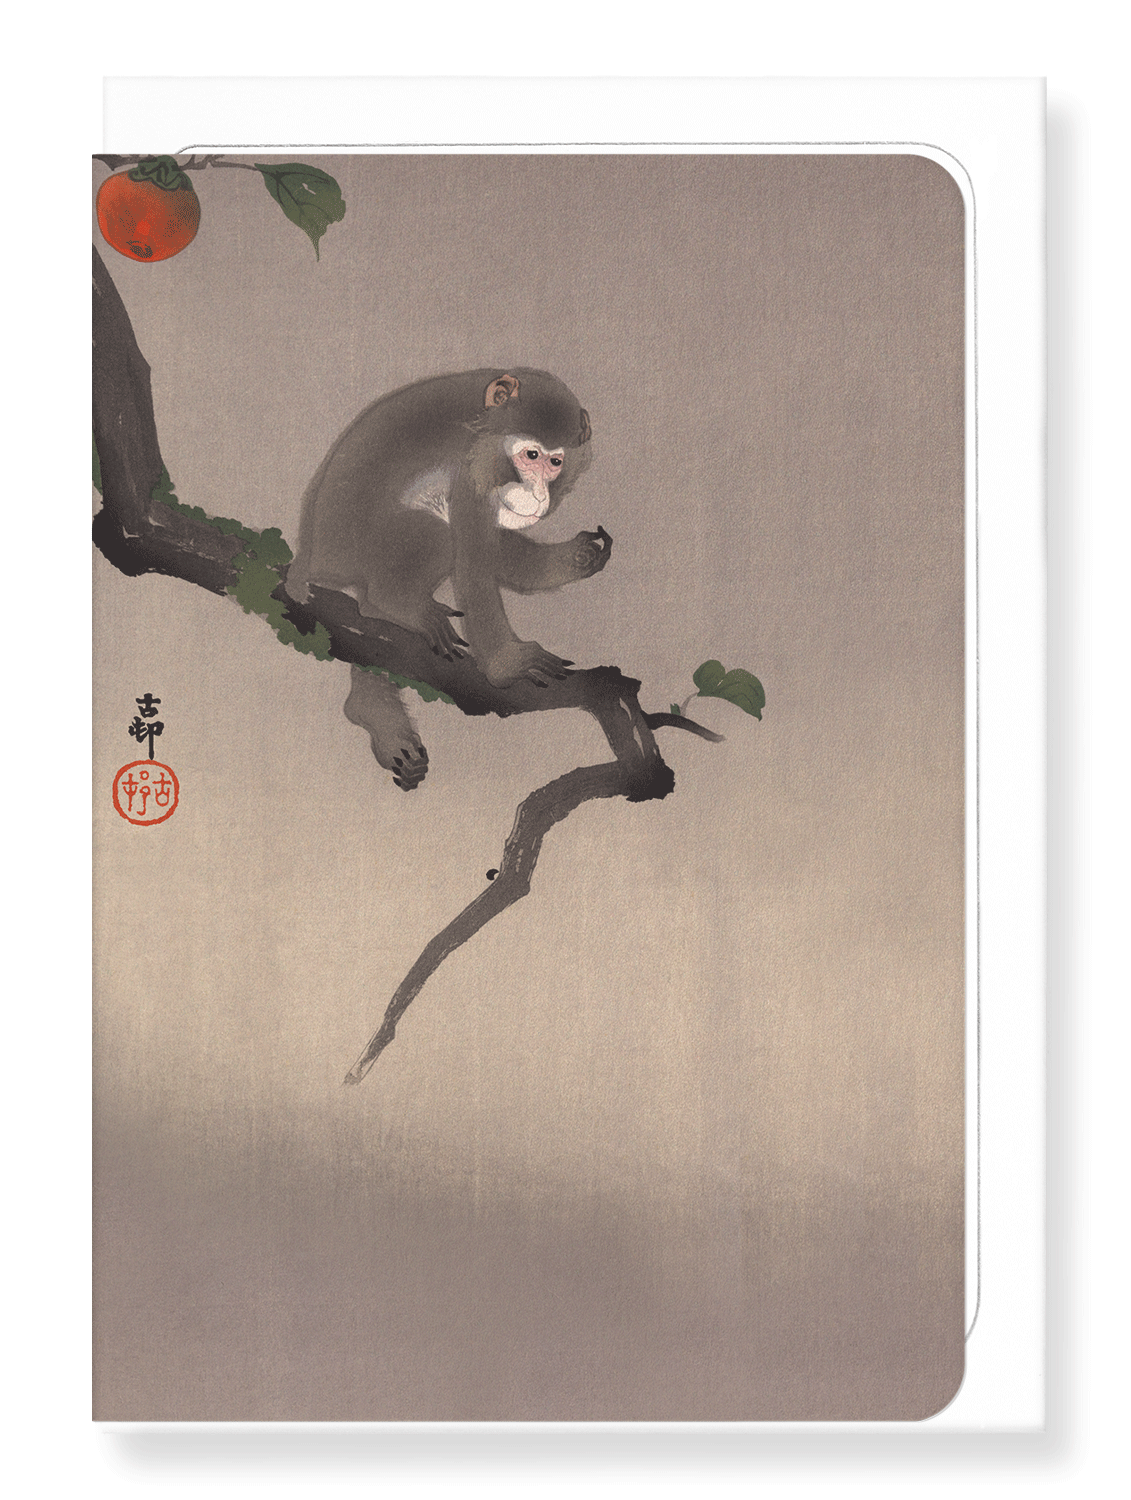 Ezen Designs - Monkey and persimmon fruit - Greeting Card - Front